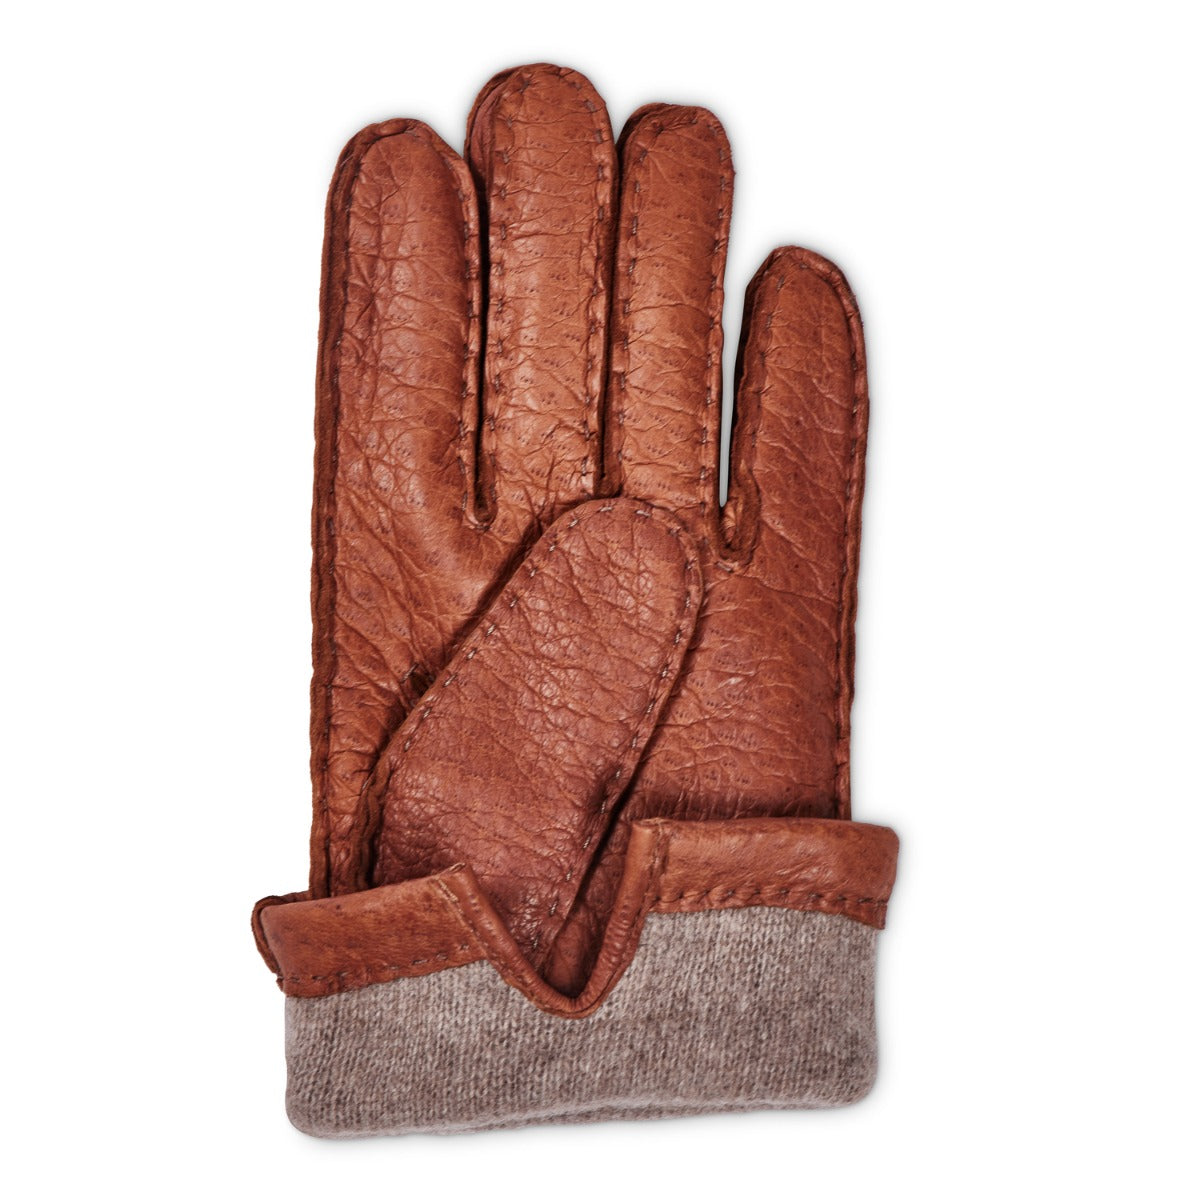 A pair of Sovereign Grade Medium Brown Peccary Leather Gloves, Cashmere Lined by KirbyAllison.com offering maximum warmth on a white background.